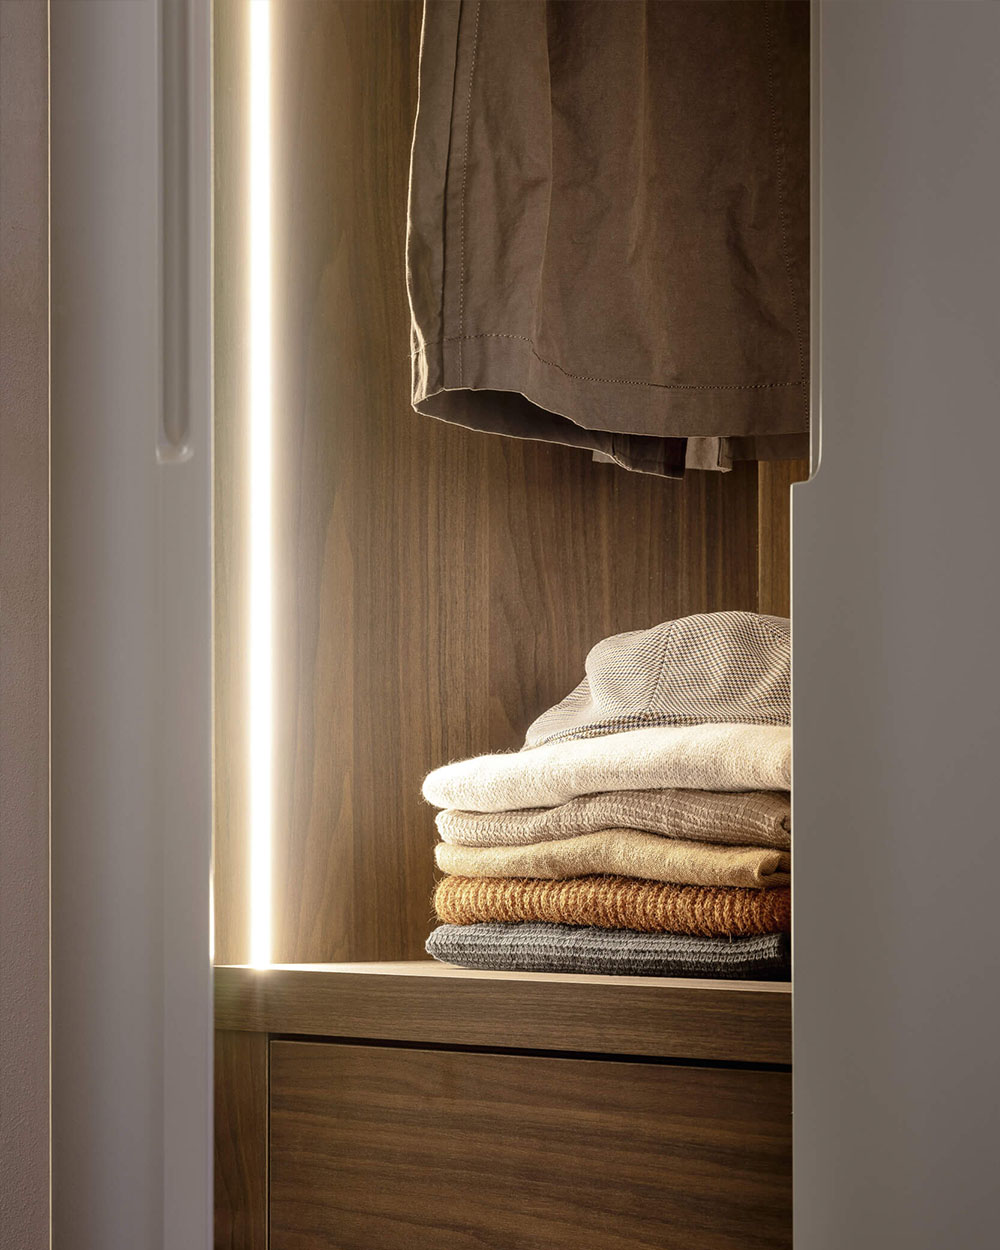 Modern, designer fitted wardrobe. Designed to fit your interior and fitted by Krieder interior experts.